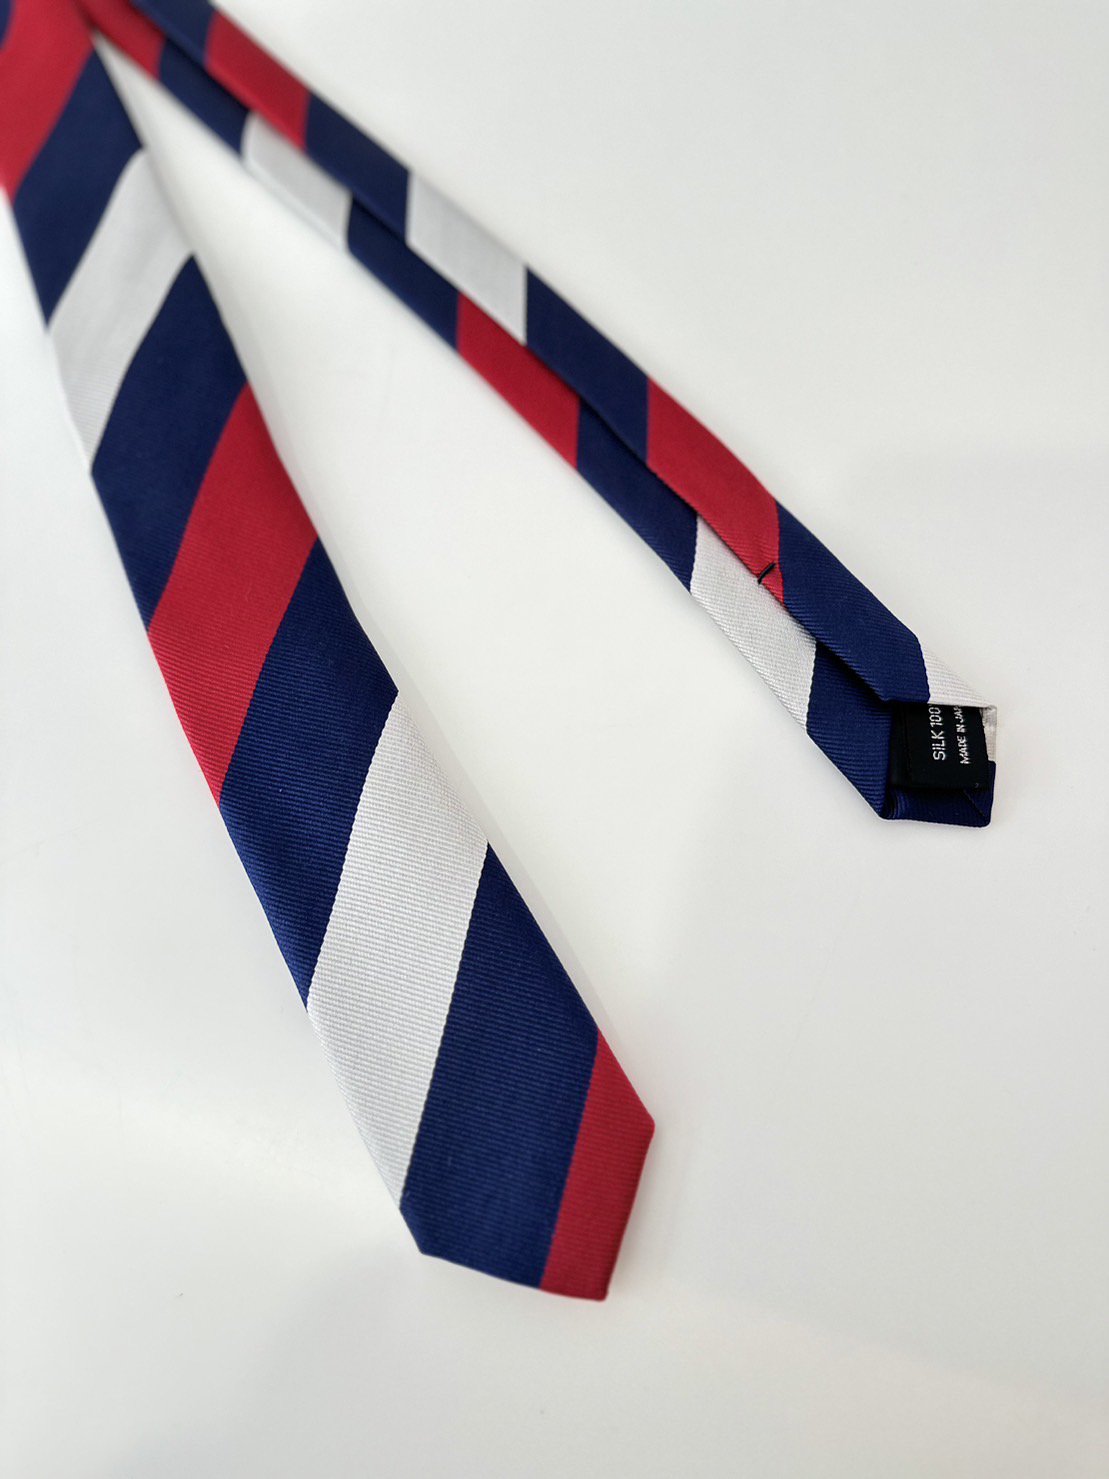 LITTLEBIG<br />3 Stripe Tie / Union<img class='new_mark_img2' src='https://img.shop-pro.jp/img/new/icons14.gif' style='border:none;display:inline;margin:0px;padding:0px;width:auto;' />